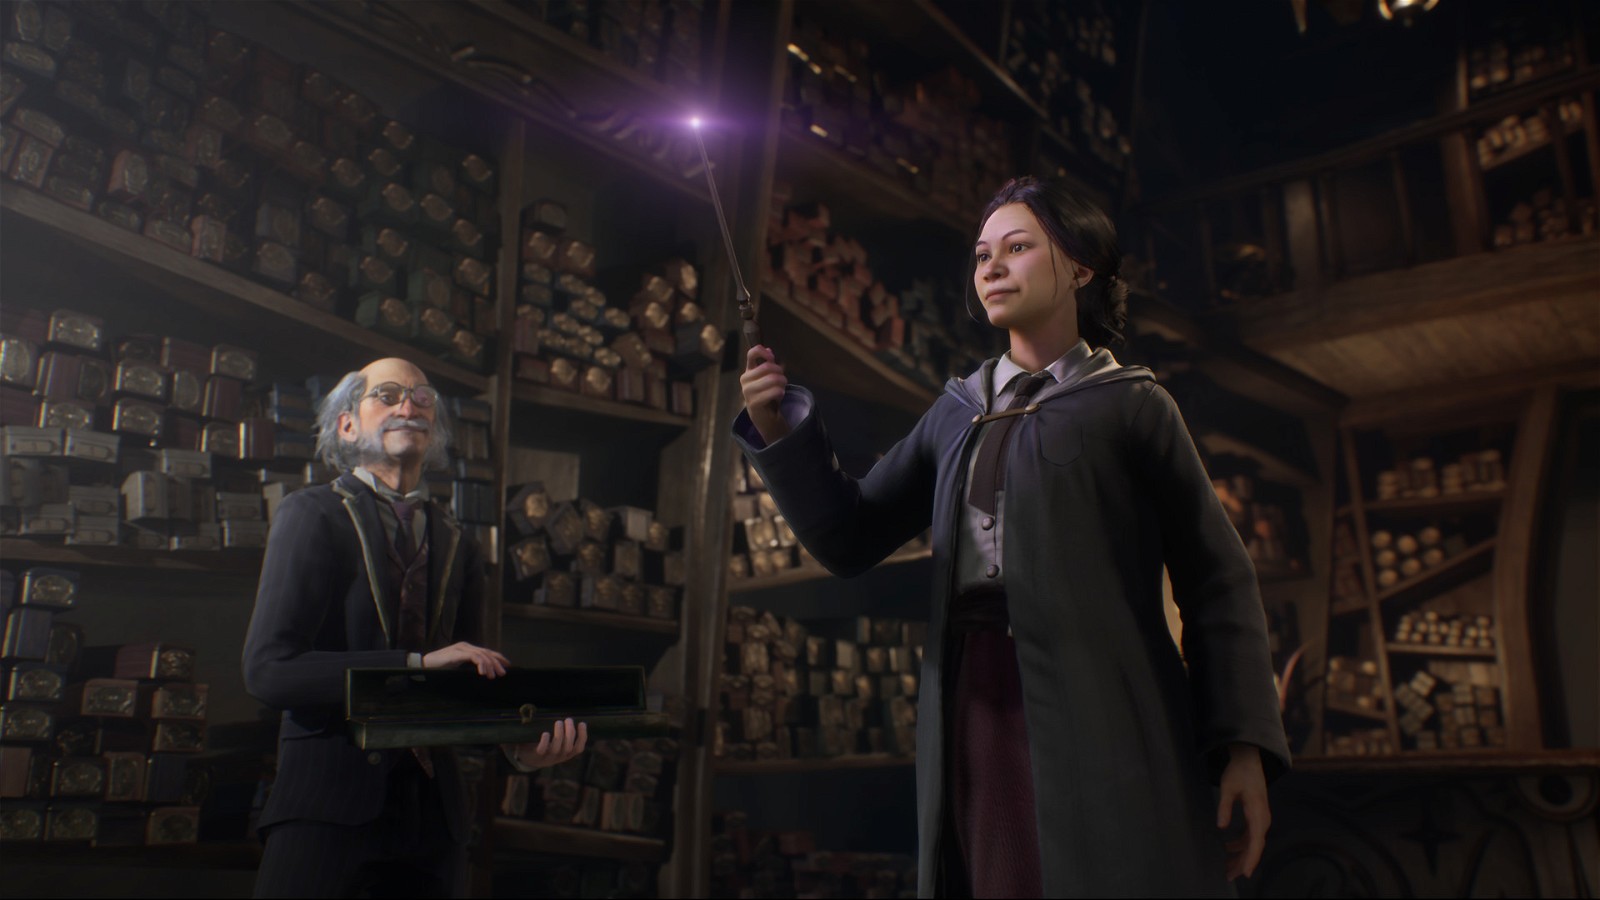 players can explore the seamless, interconnected world that will closely follow the depth found in Rowling's books